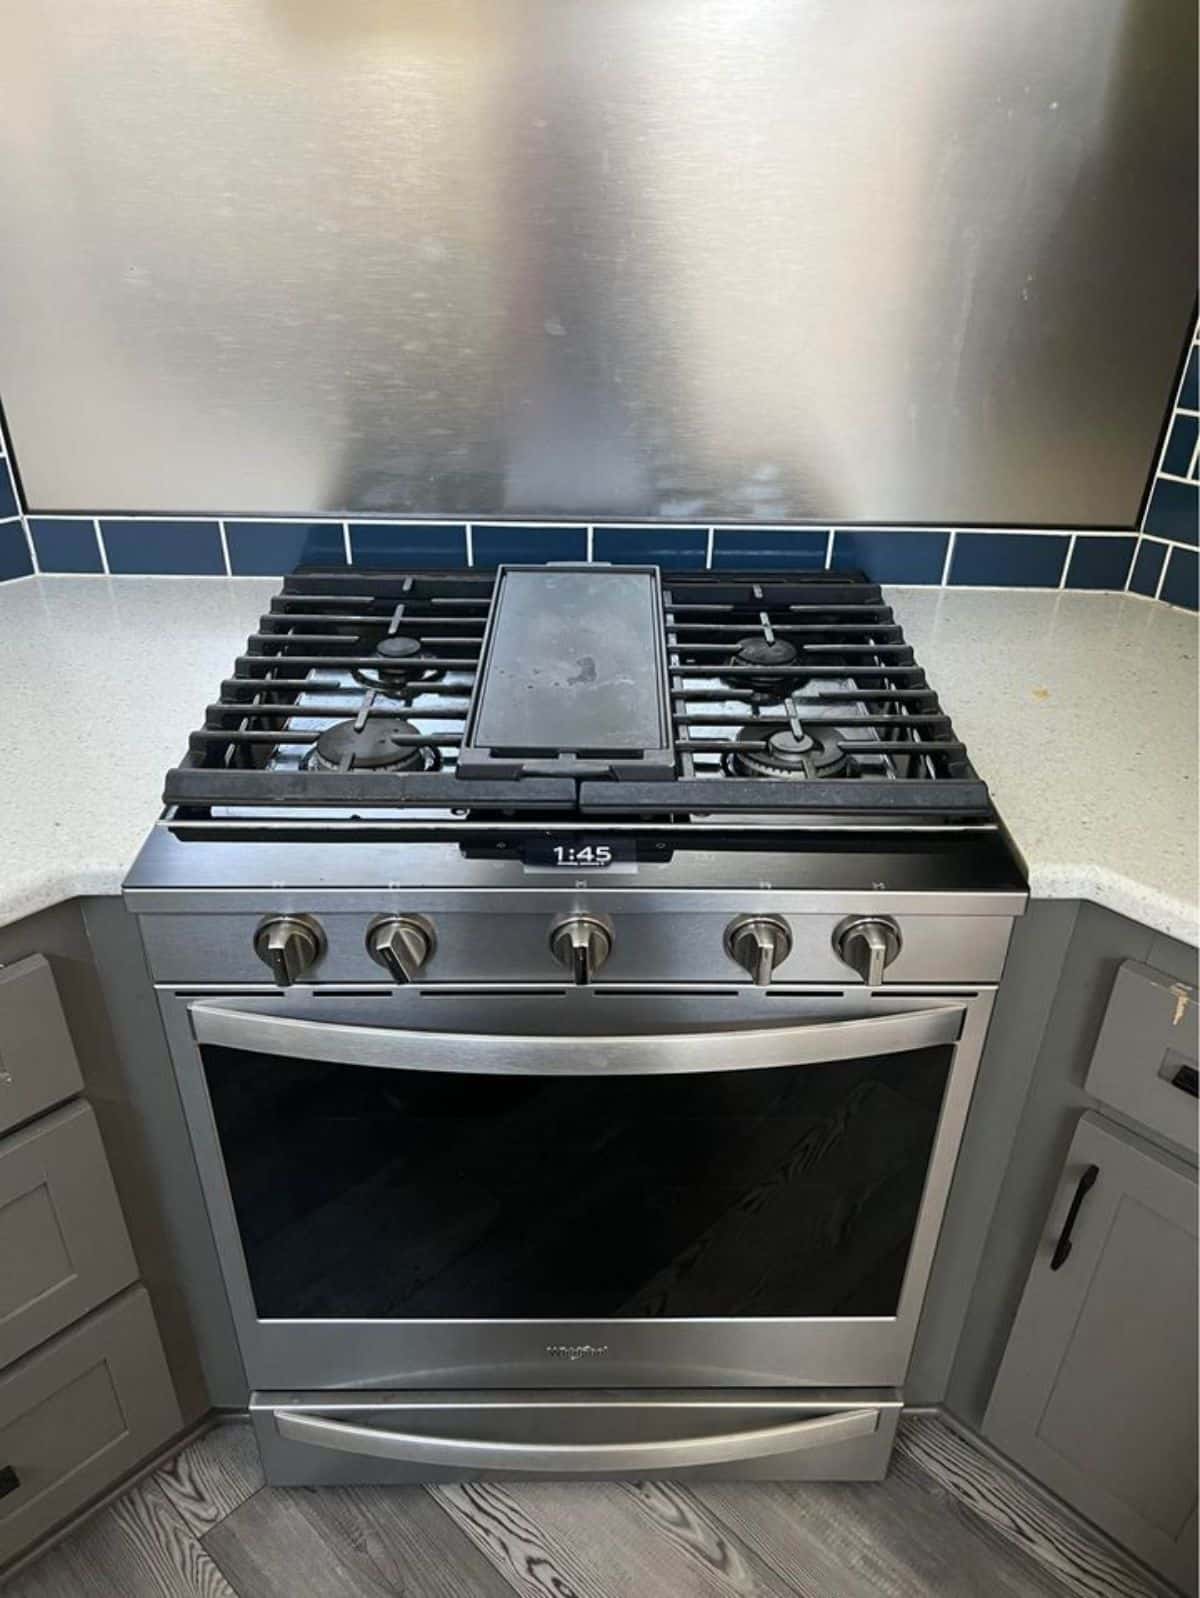 Wirlpool gas stove is also included into the deal